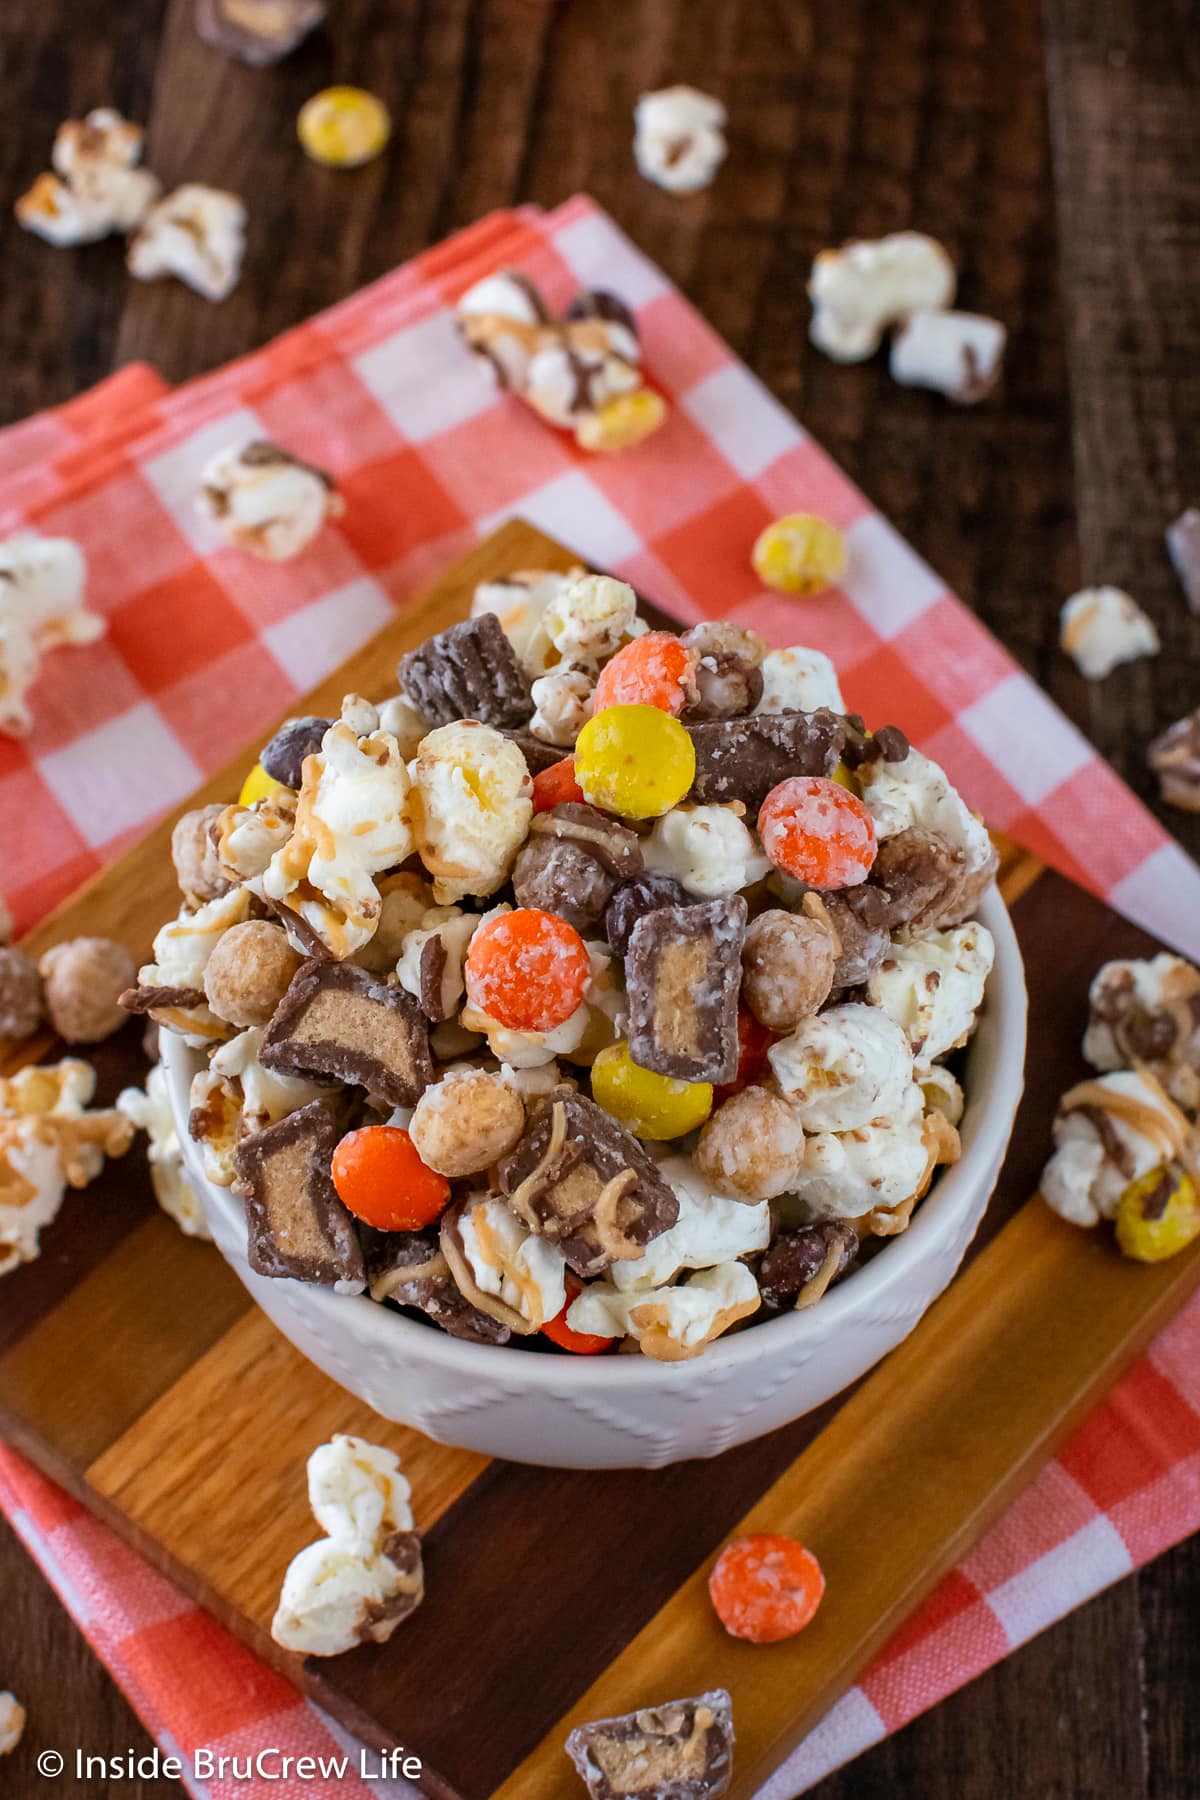 Candy and popcorn in a white bowl.